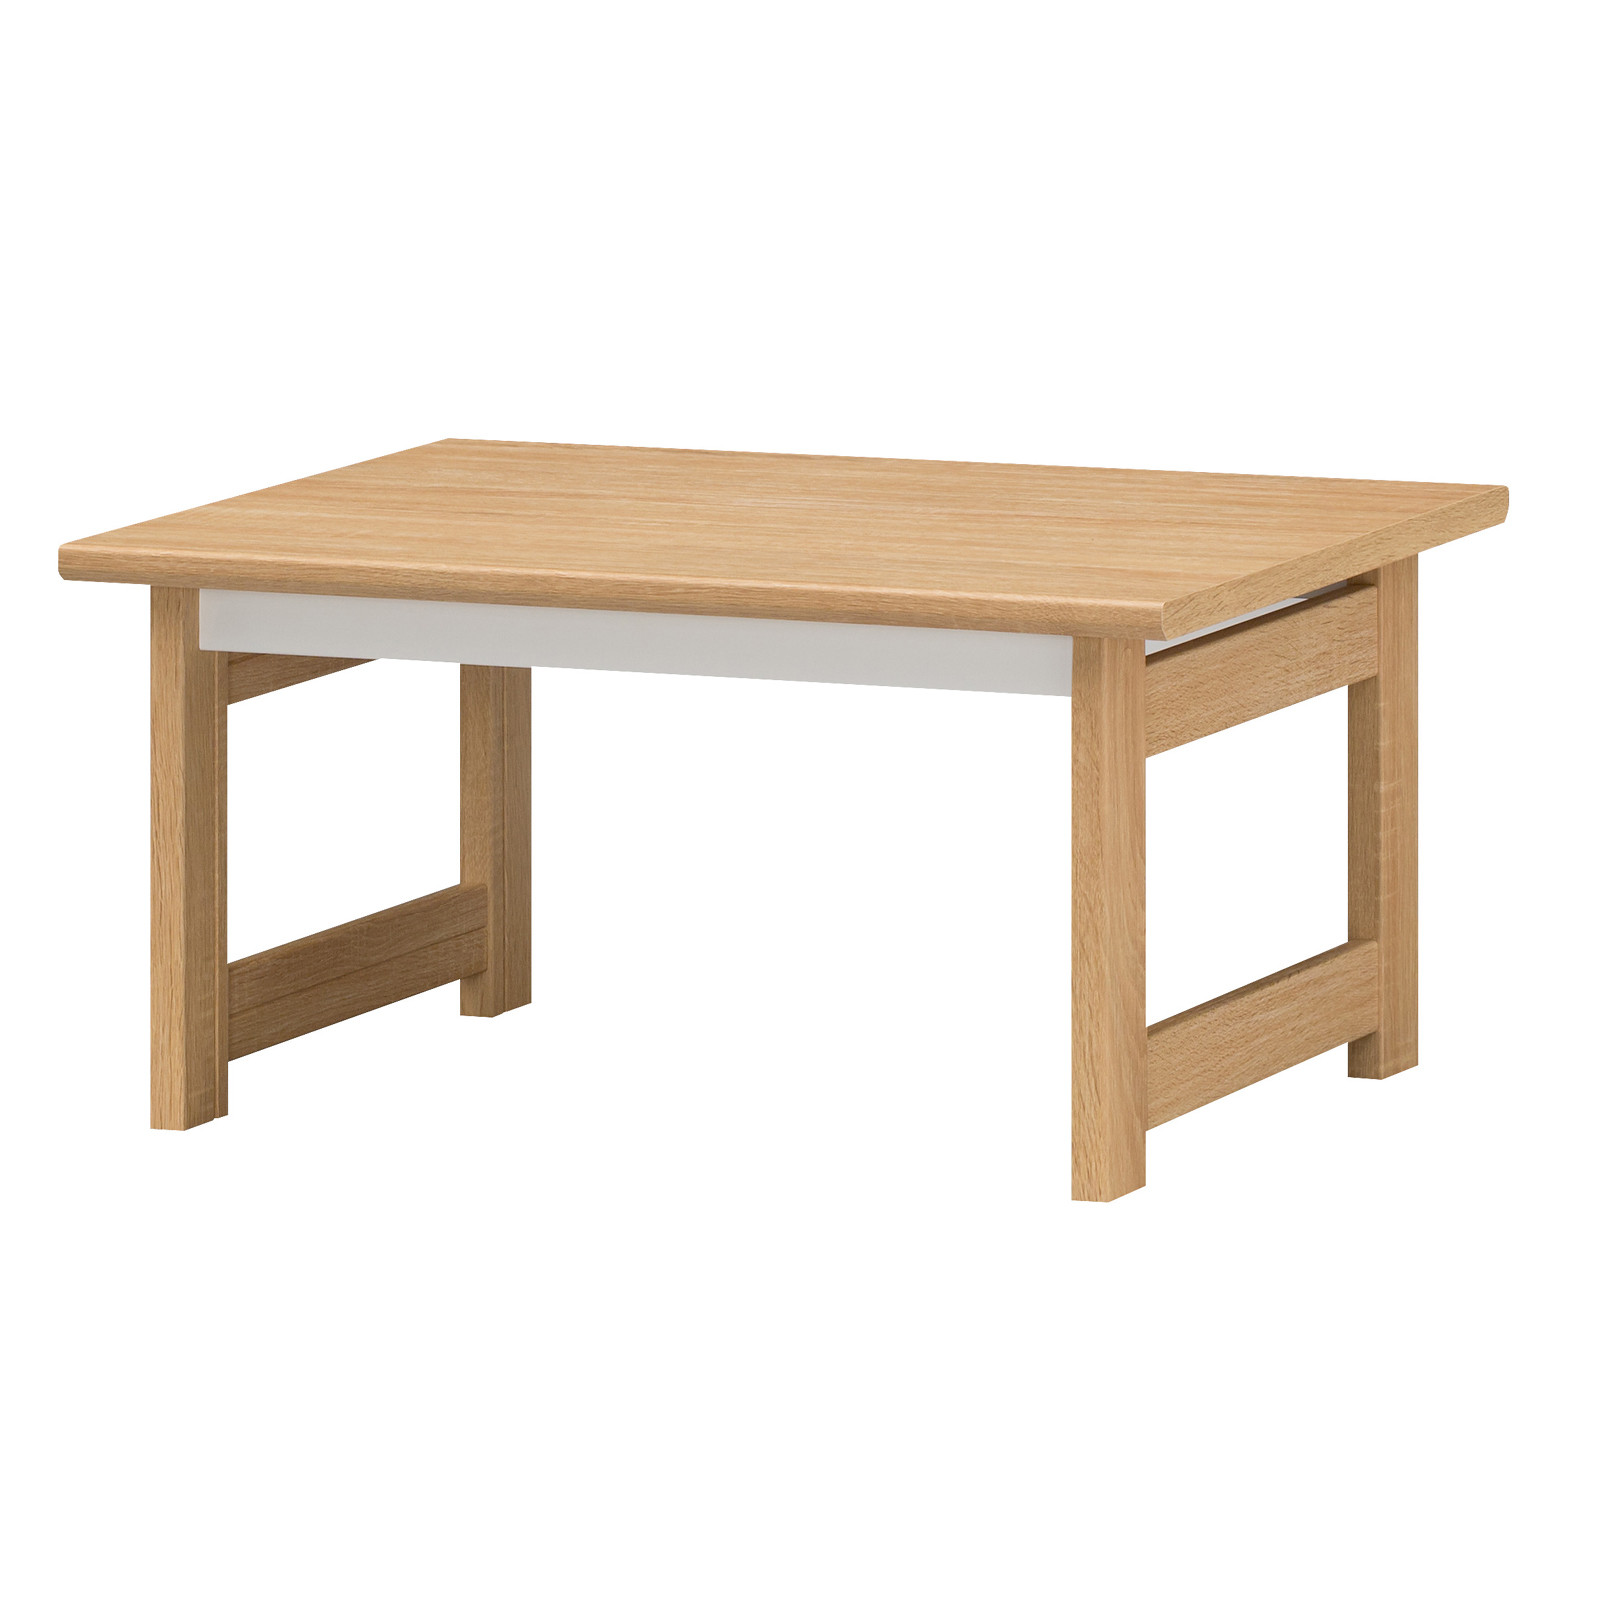 Life Student Low Table Export Japanese Products To The World At